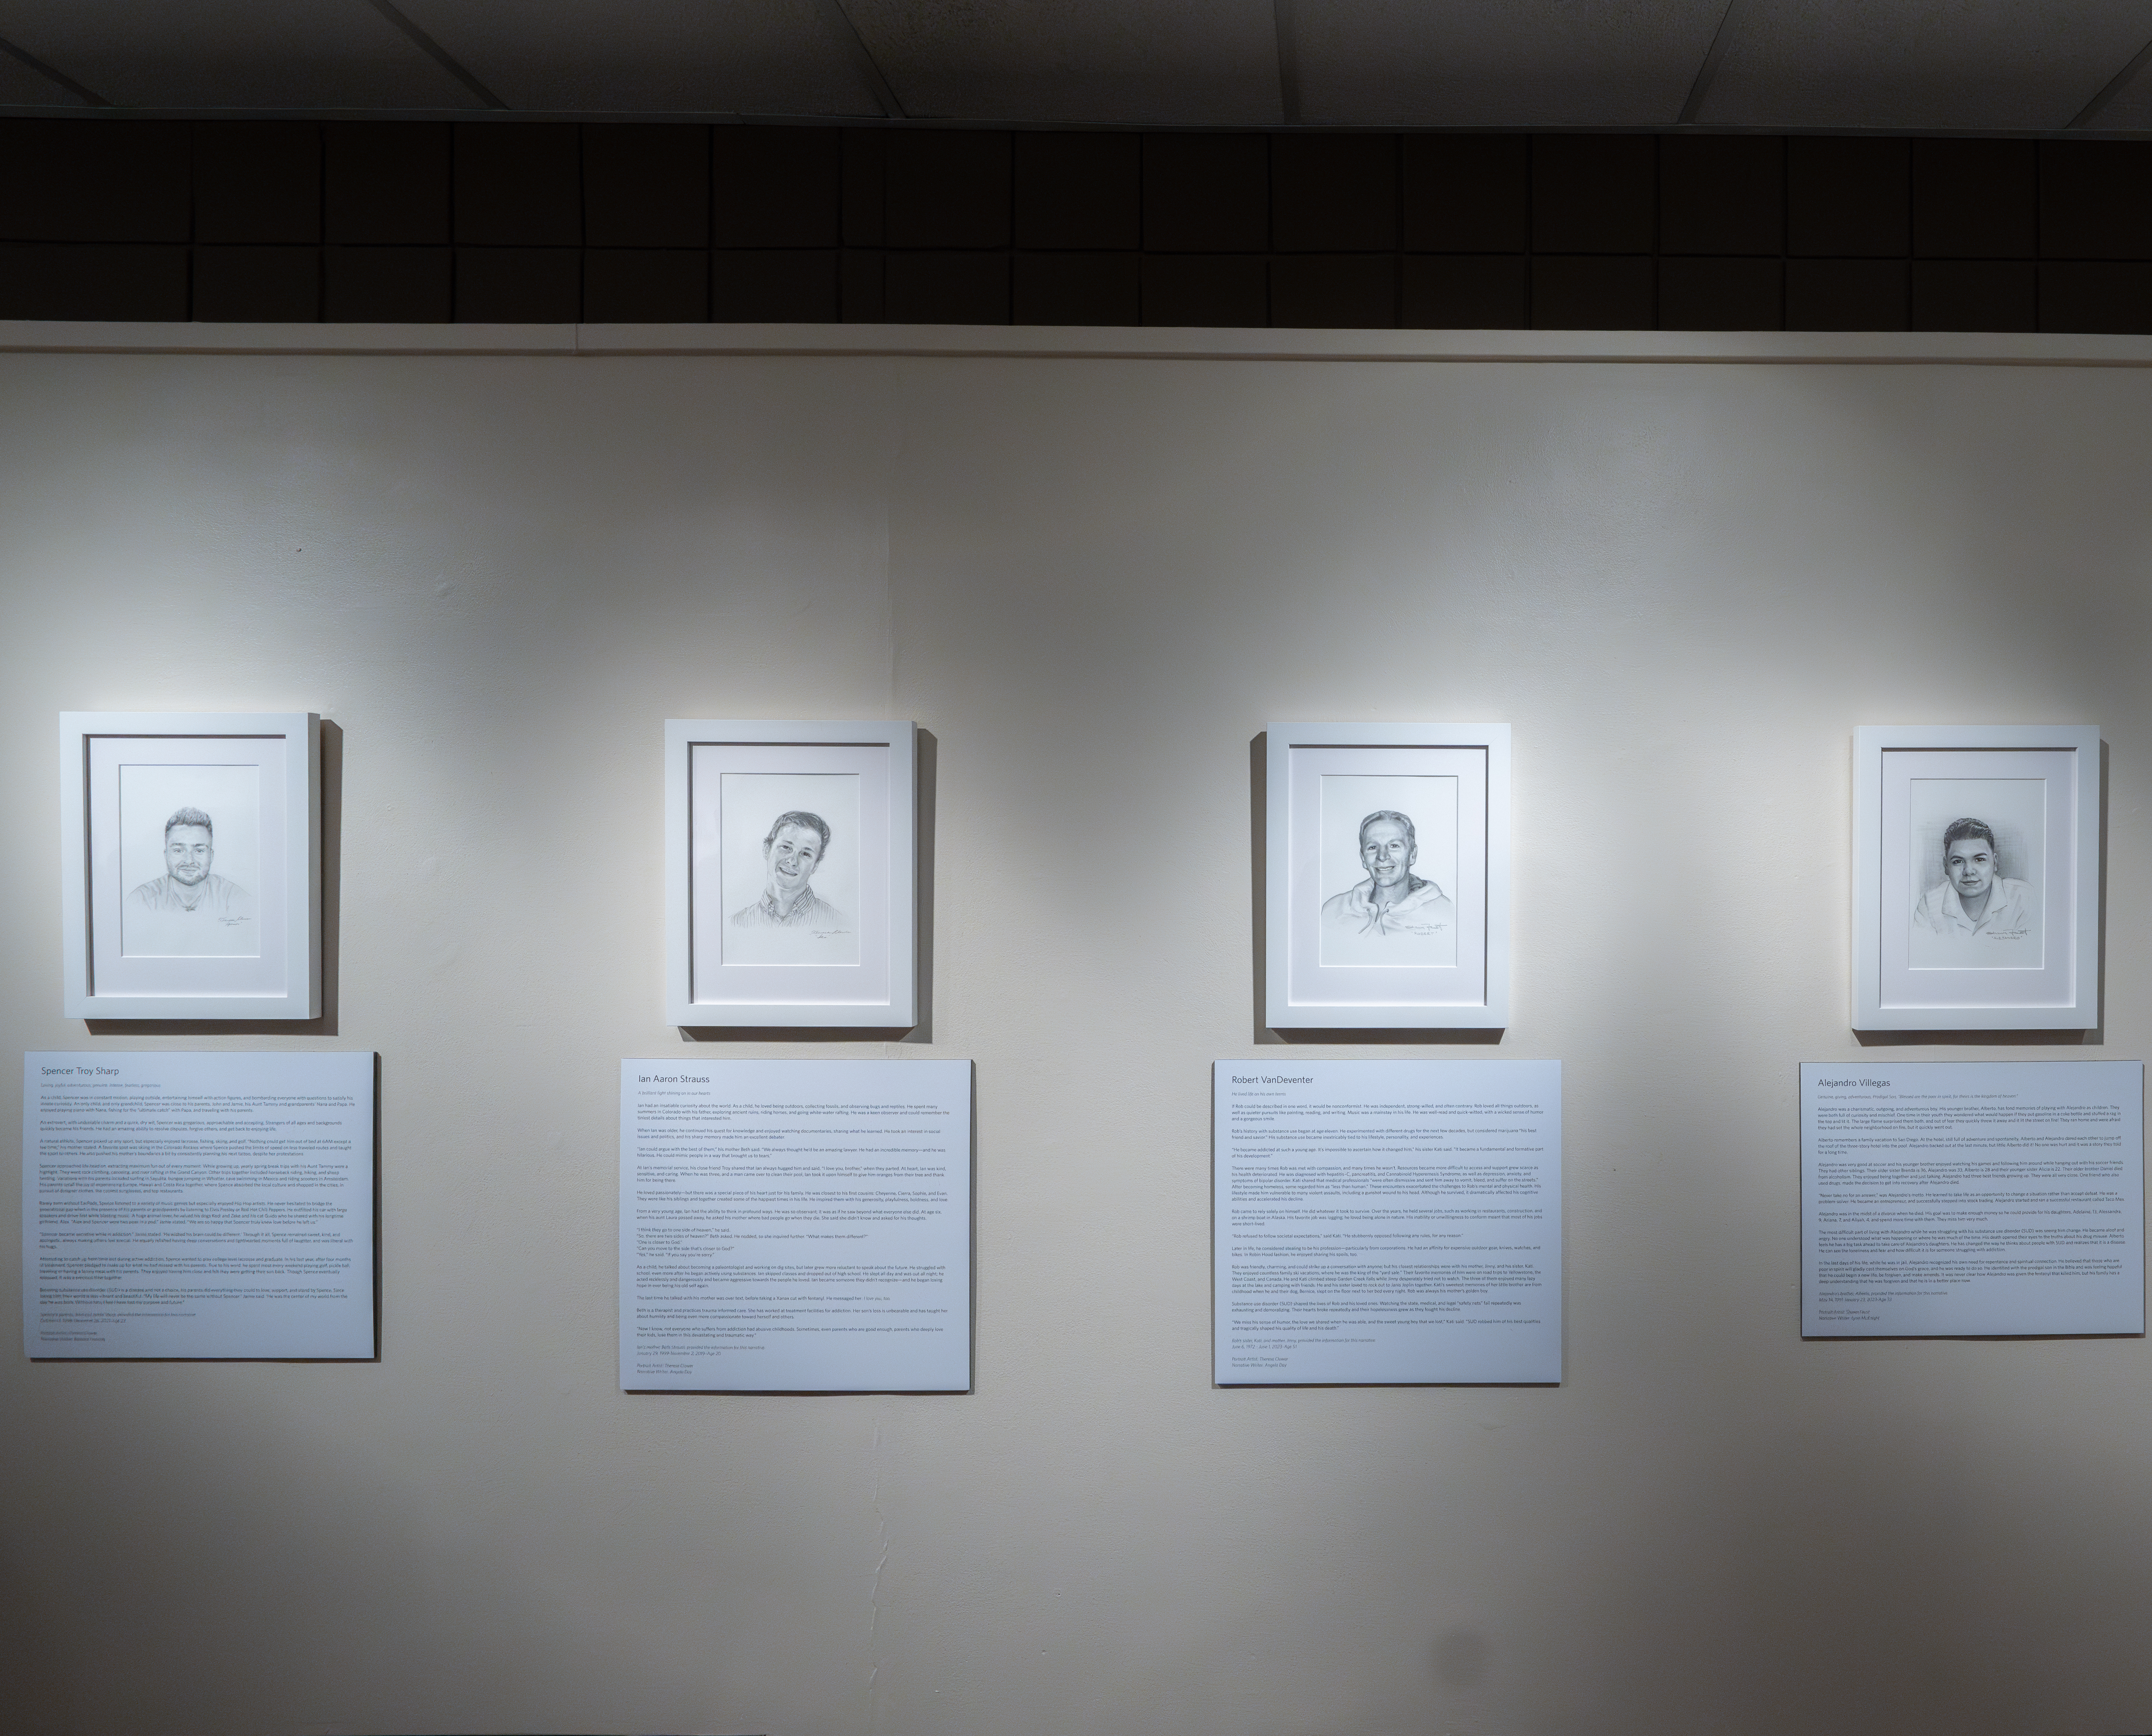 A gallery of drawings of people at the Into Light exhibit at the University of Denver.